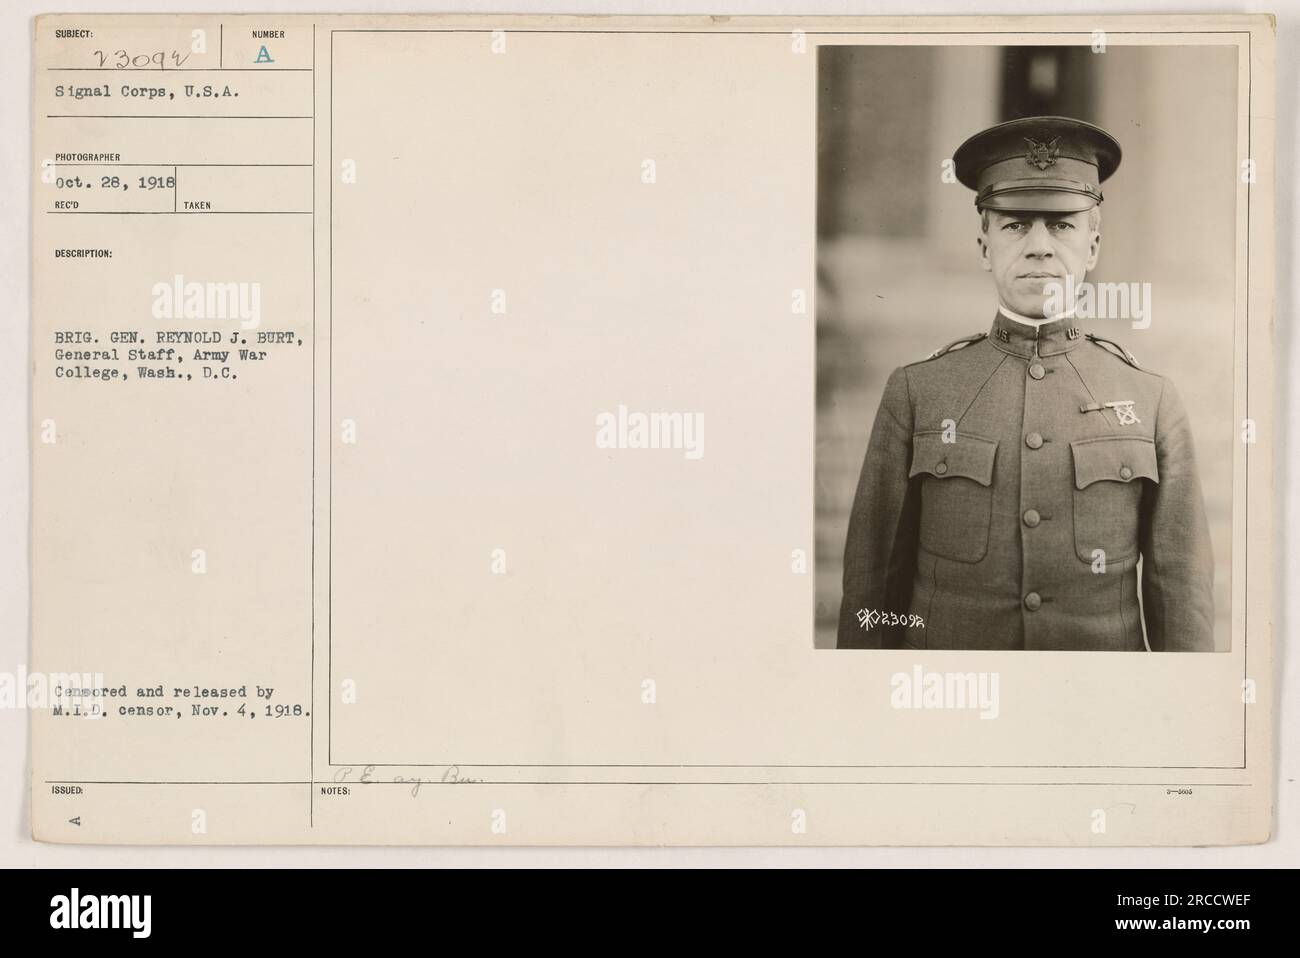 Brigadier General Reynold J. Burt of the General Staff at the Army War College in Washington D.C. during World War One. Photograph taken by the Signal Corps on October 28, 1918. The image was censored and released by the Military Intelligence Division censor on November 4, 1918. Stock Photo